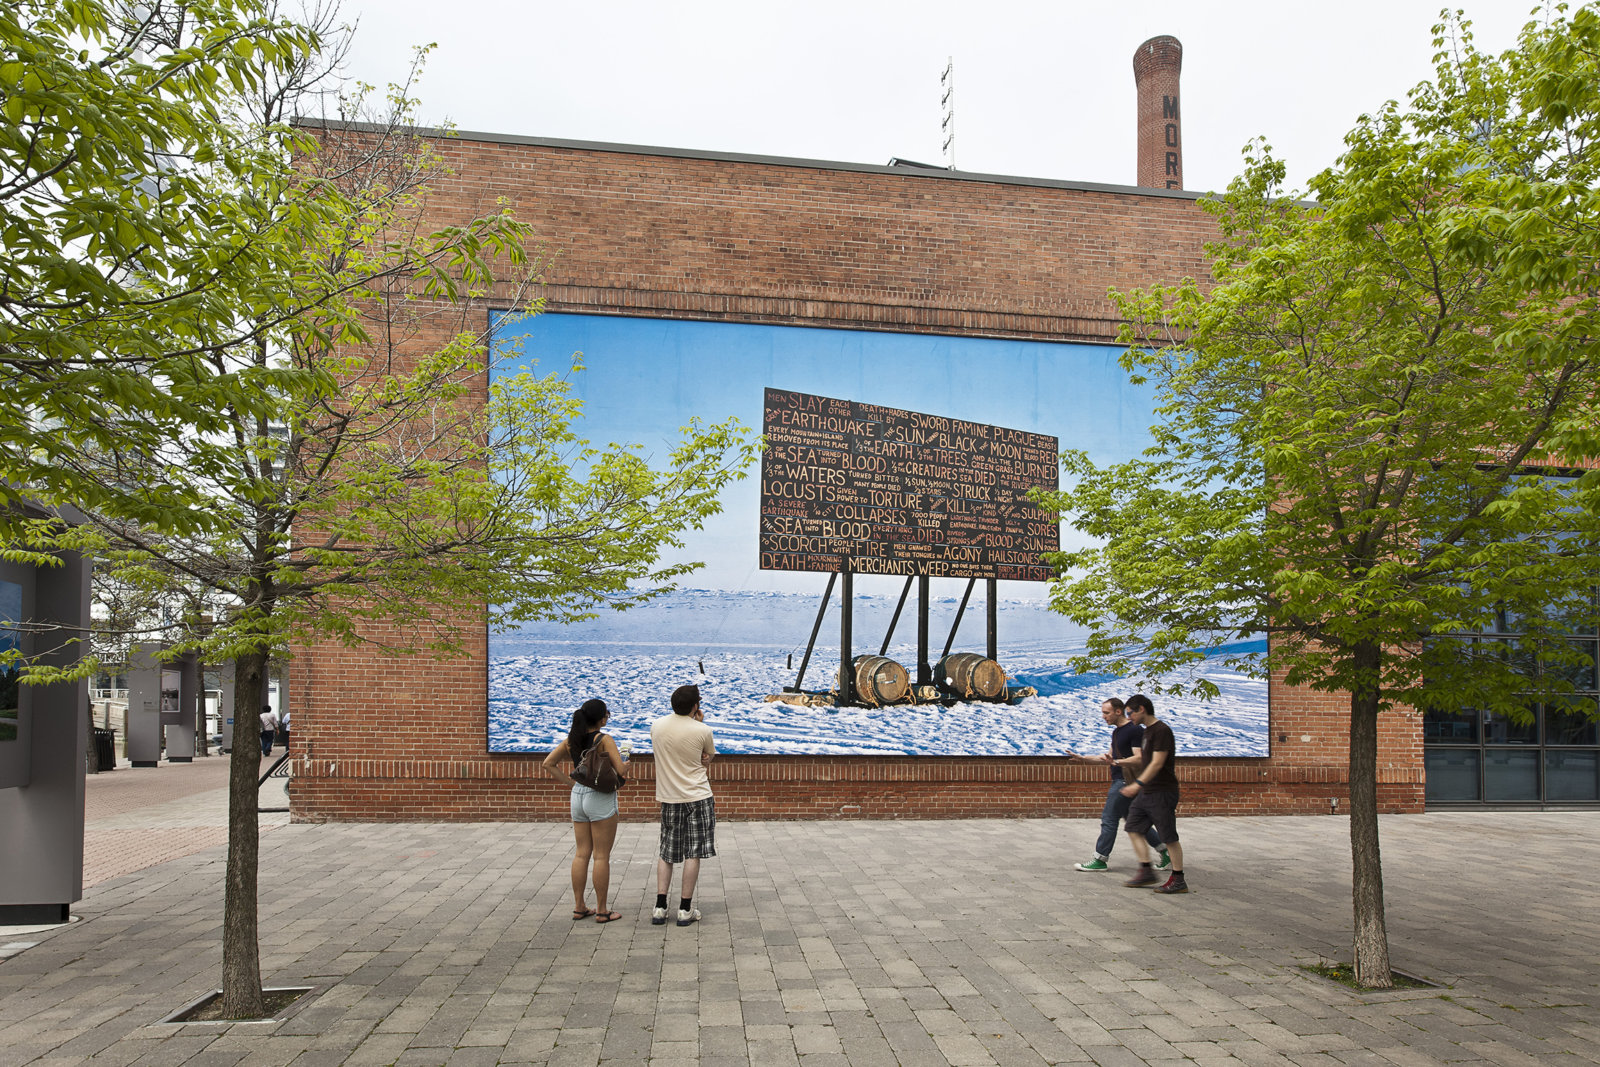 Kevin Schmidt, A Sign in the Northwest Passage (Billboard Mural), 2011, digital photo, dimensions variable. Installation view, The Power Plant, Toronto, 2011